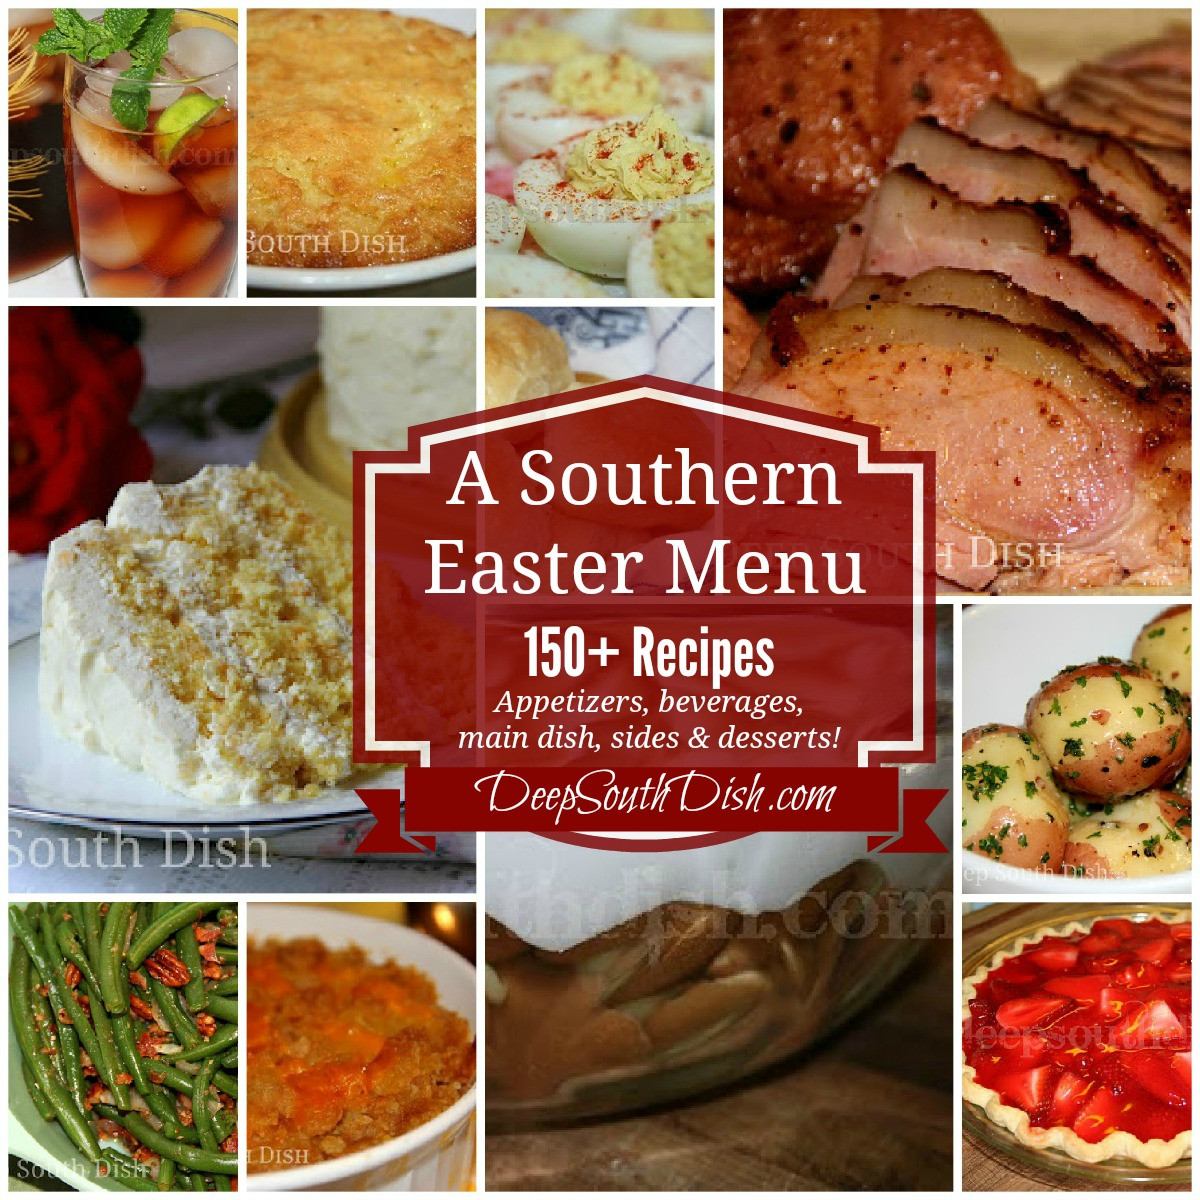 Easter Dinner Menue
 Deep South Dish Southern Easter Menu Ideas and Recipes